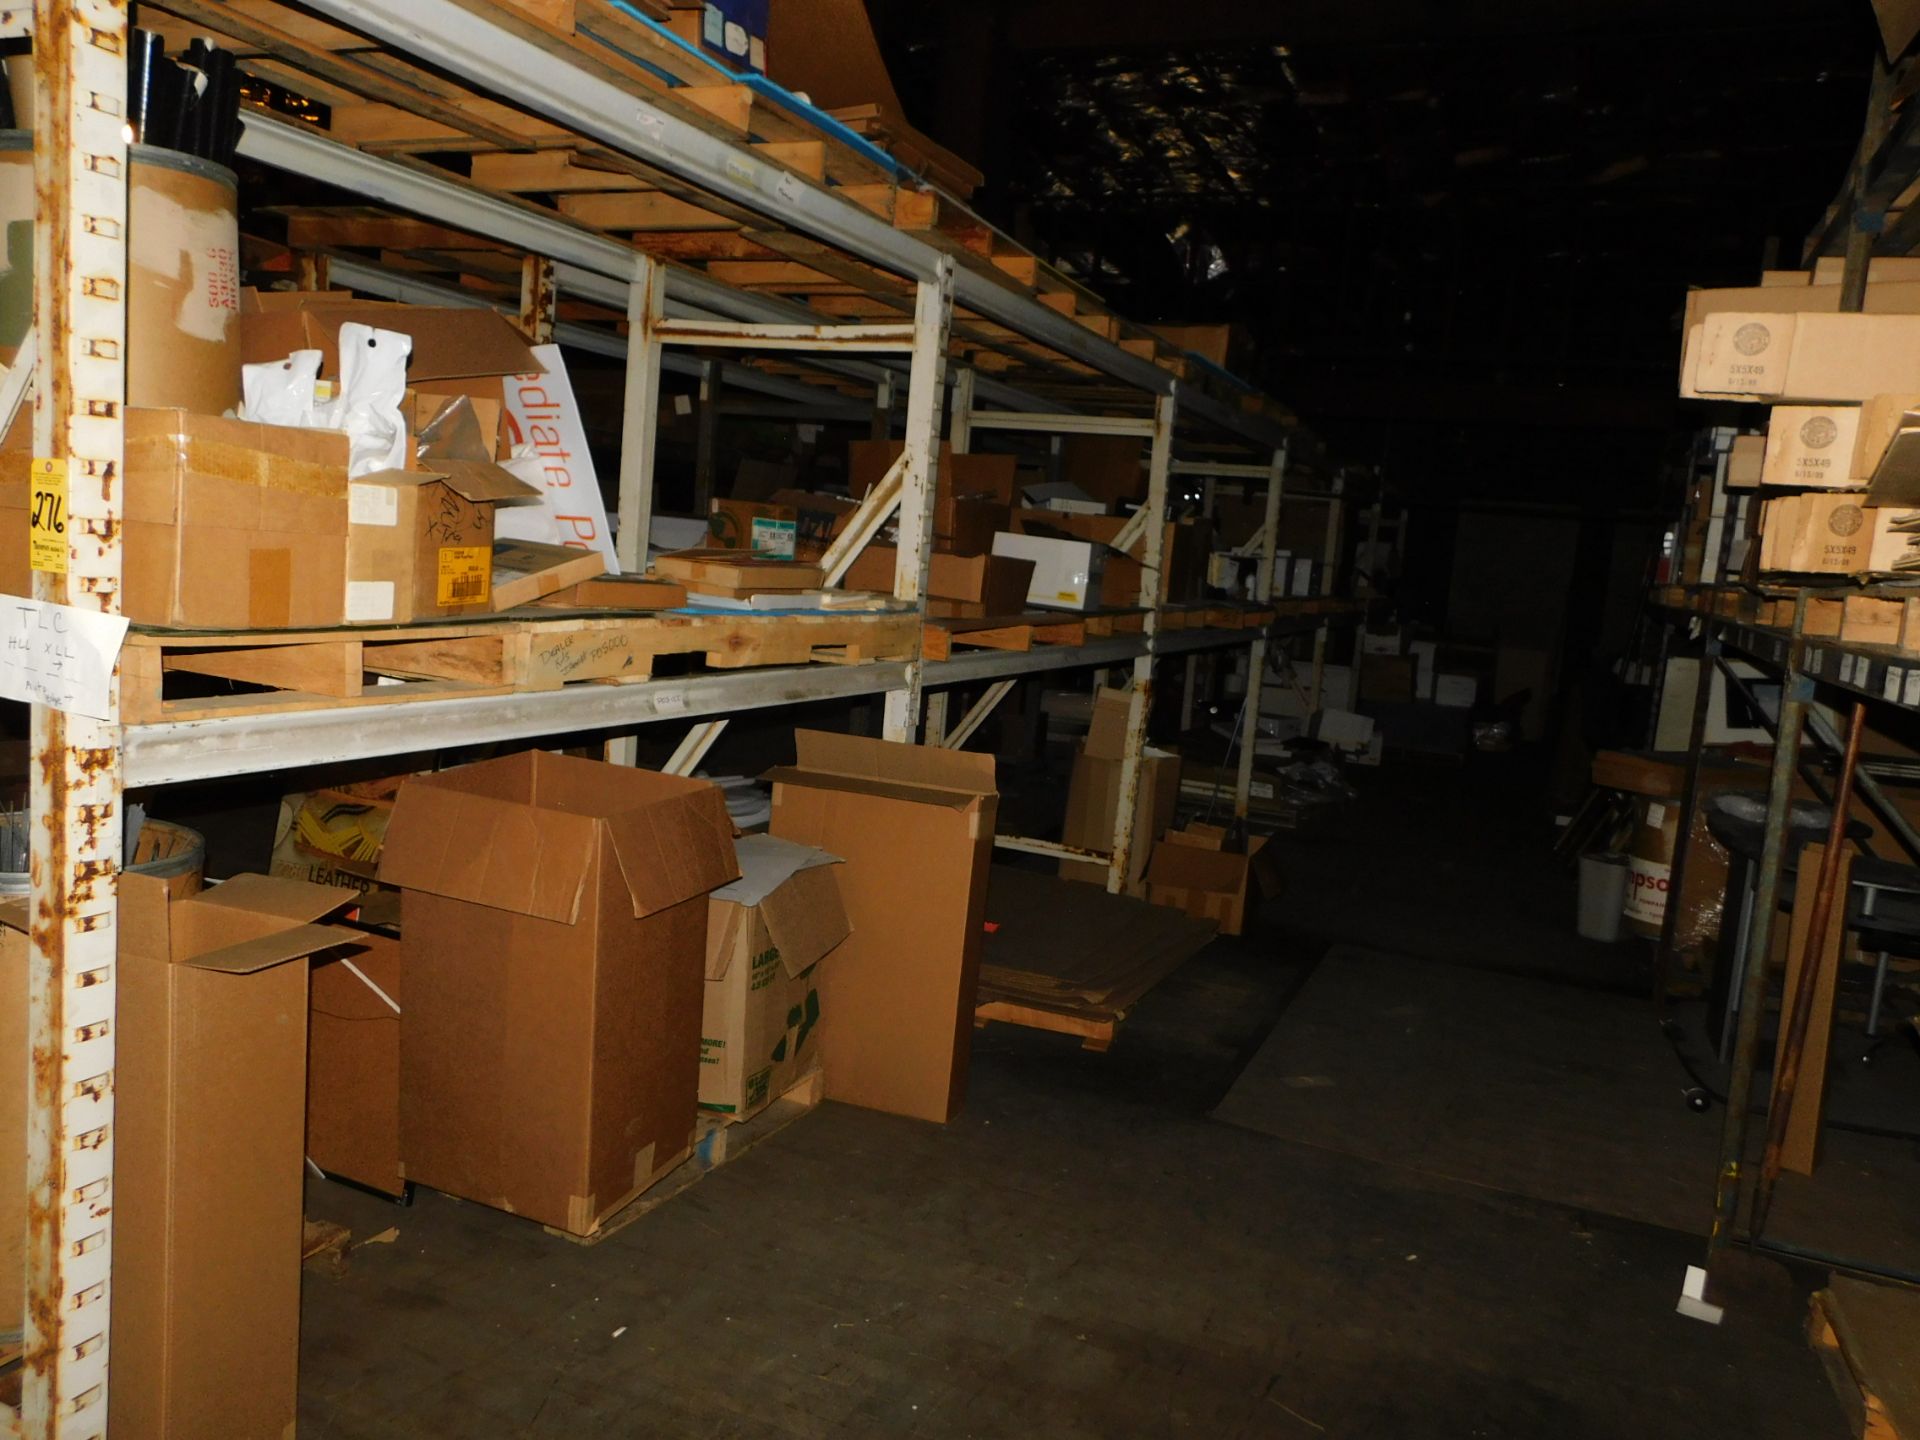 (6) Sections of Pallet Shelving and Contents